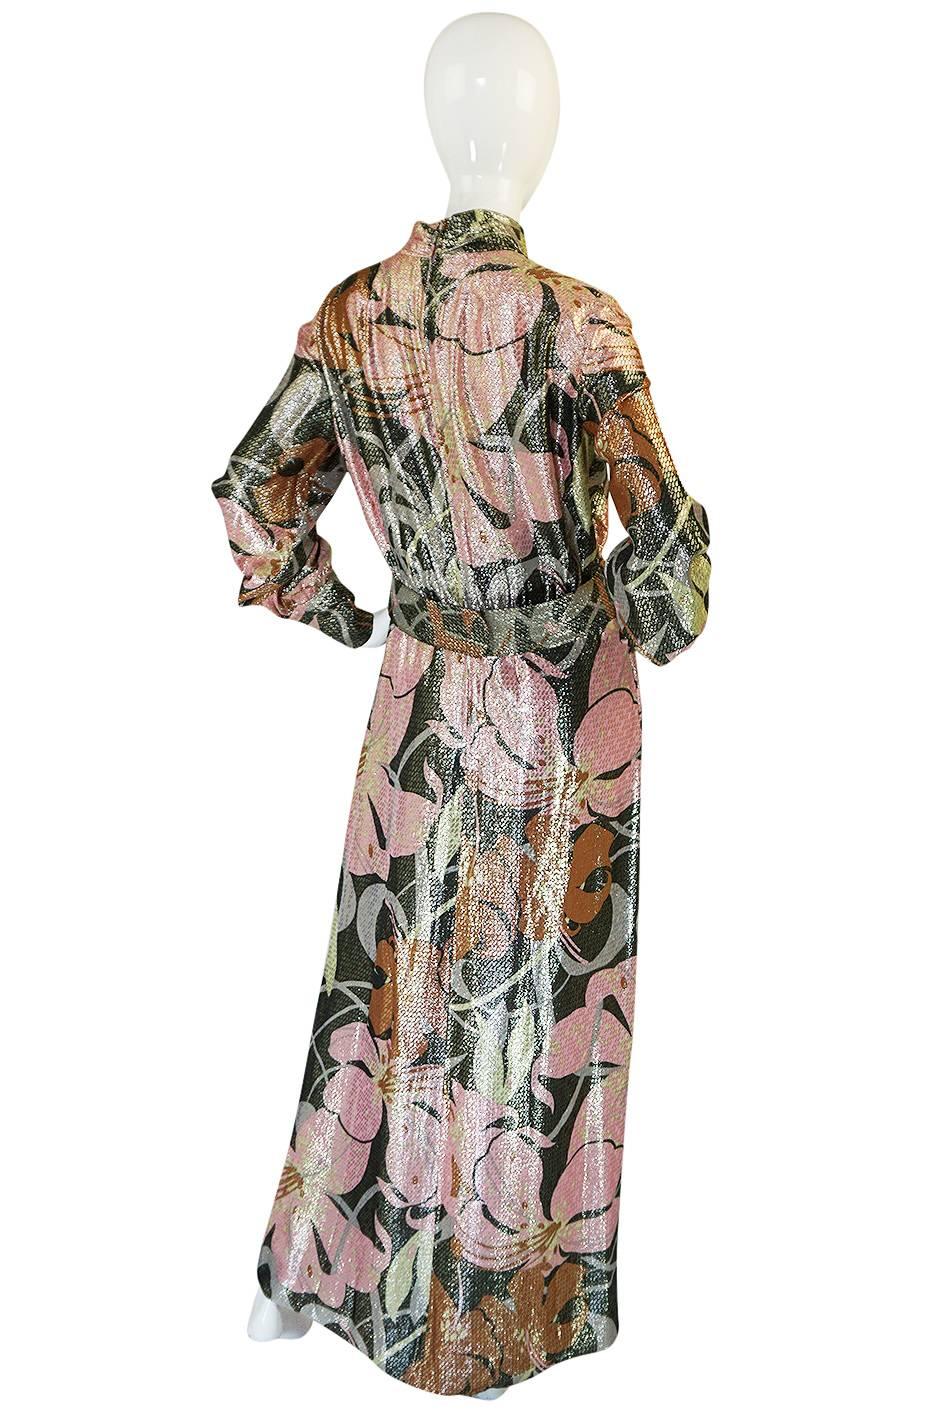 

The color and fabric on this dress is quite amazing - it is a light metallic lurex that has a gold overlay on top of a fabulous mod feeling pink toned print that I love. The pattern that is worked onto the base fabric covers the entire surface